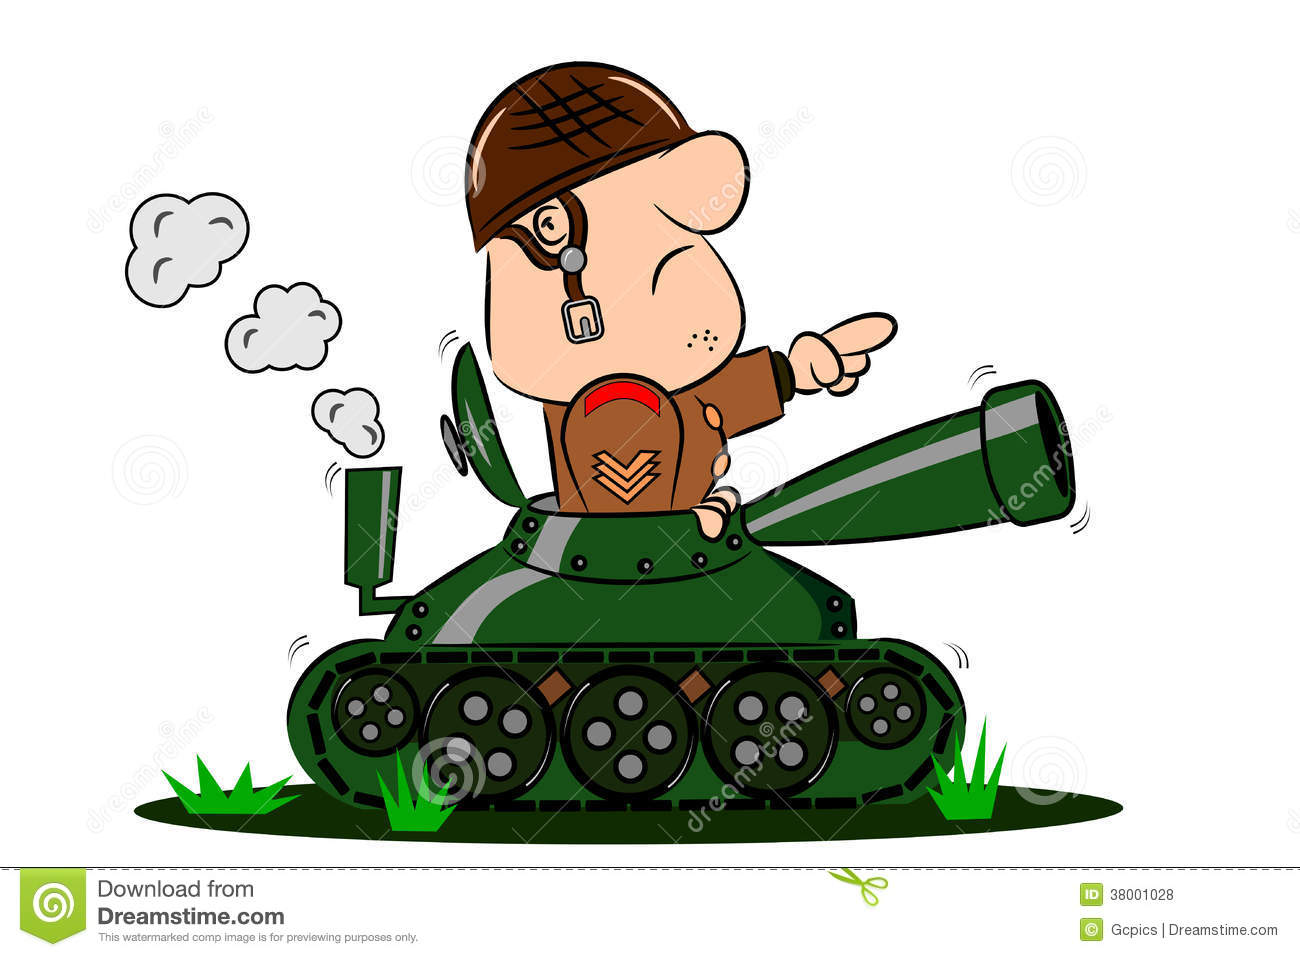 Cartoon Soldier In Army Tank Royalty Free Stock Photos   Image